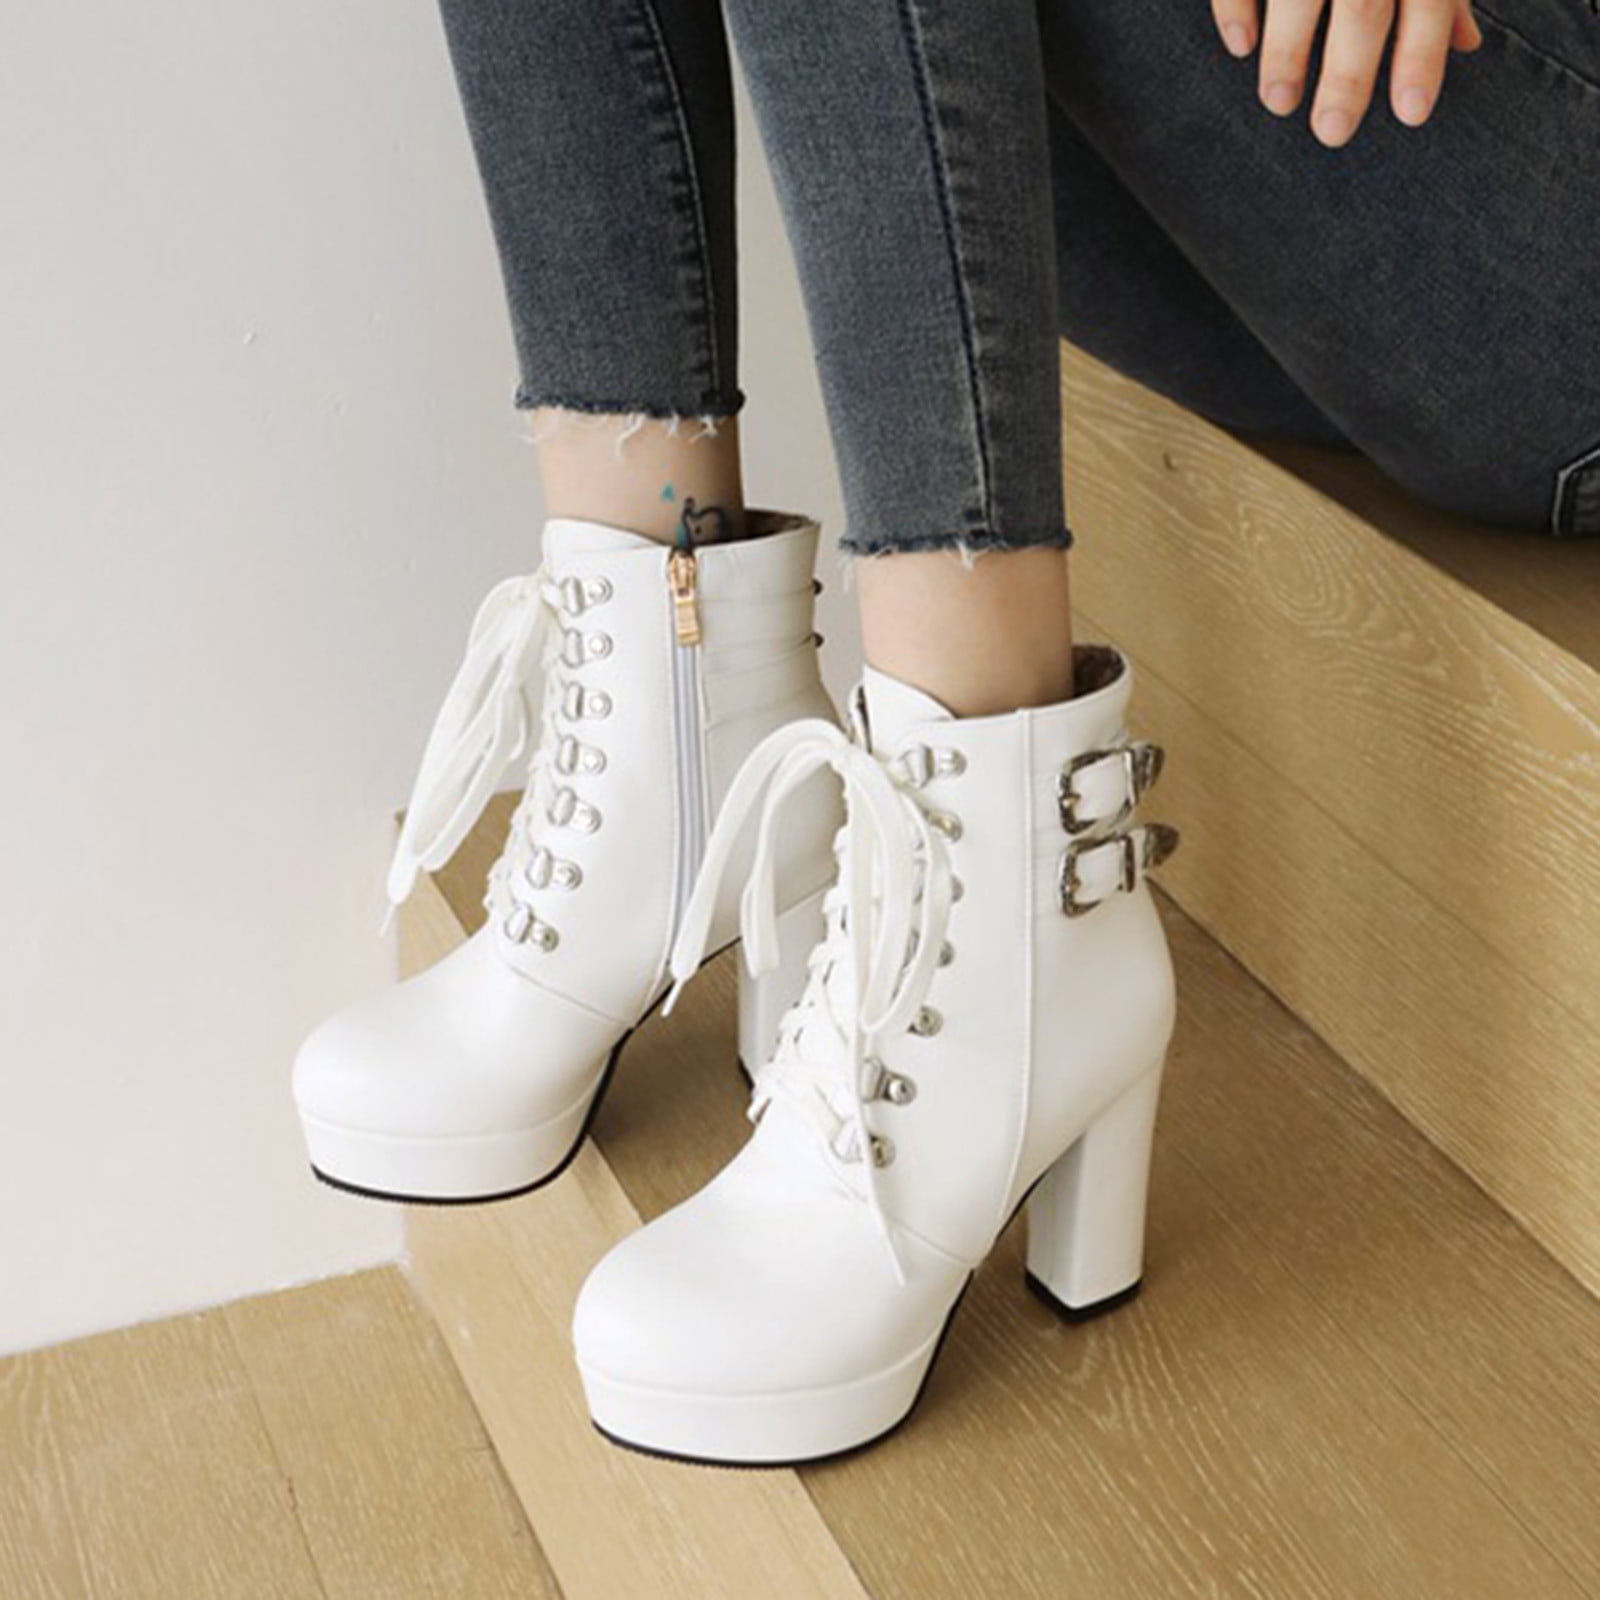 Stradivarius lace up ankle boots in white | ASOS | Heels boots outfit, White  ankle boots, Winter boots women